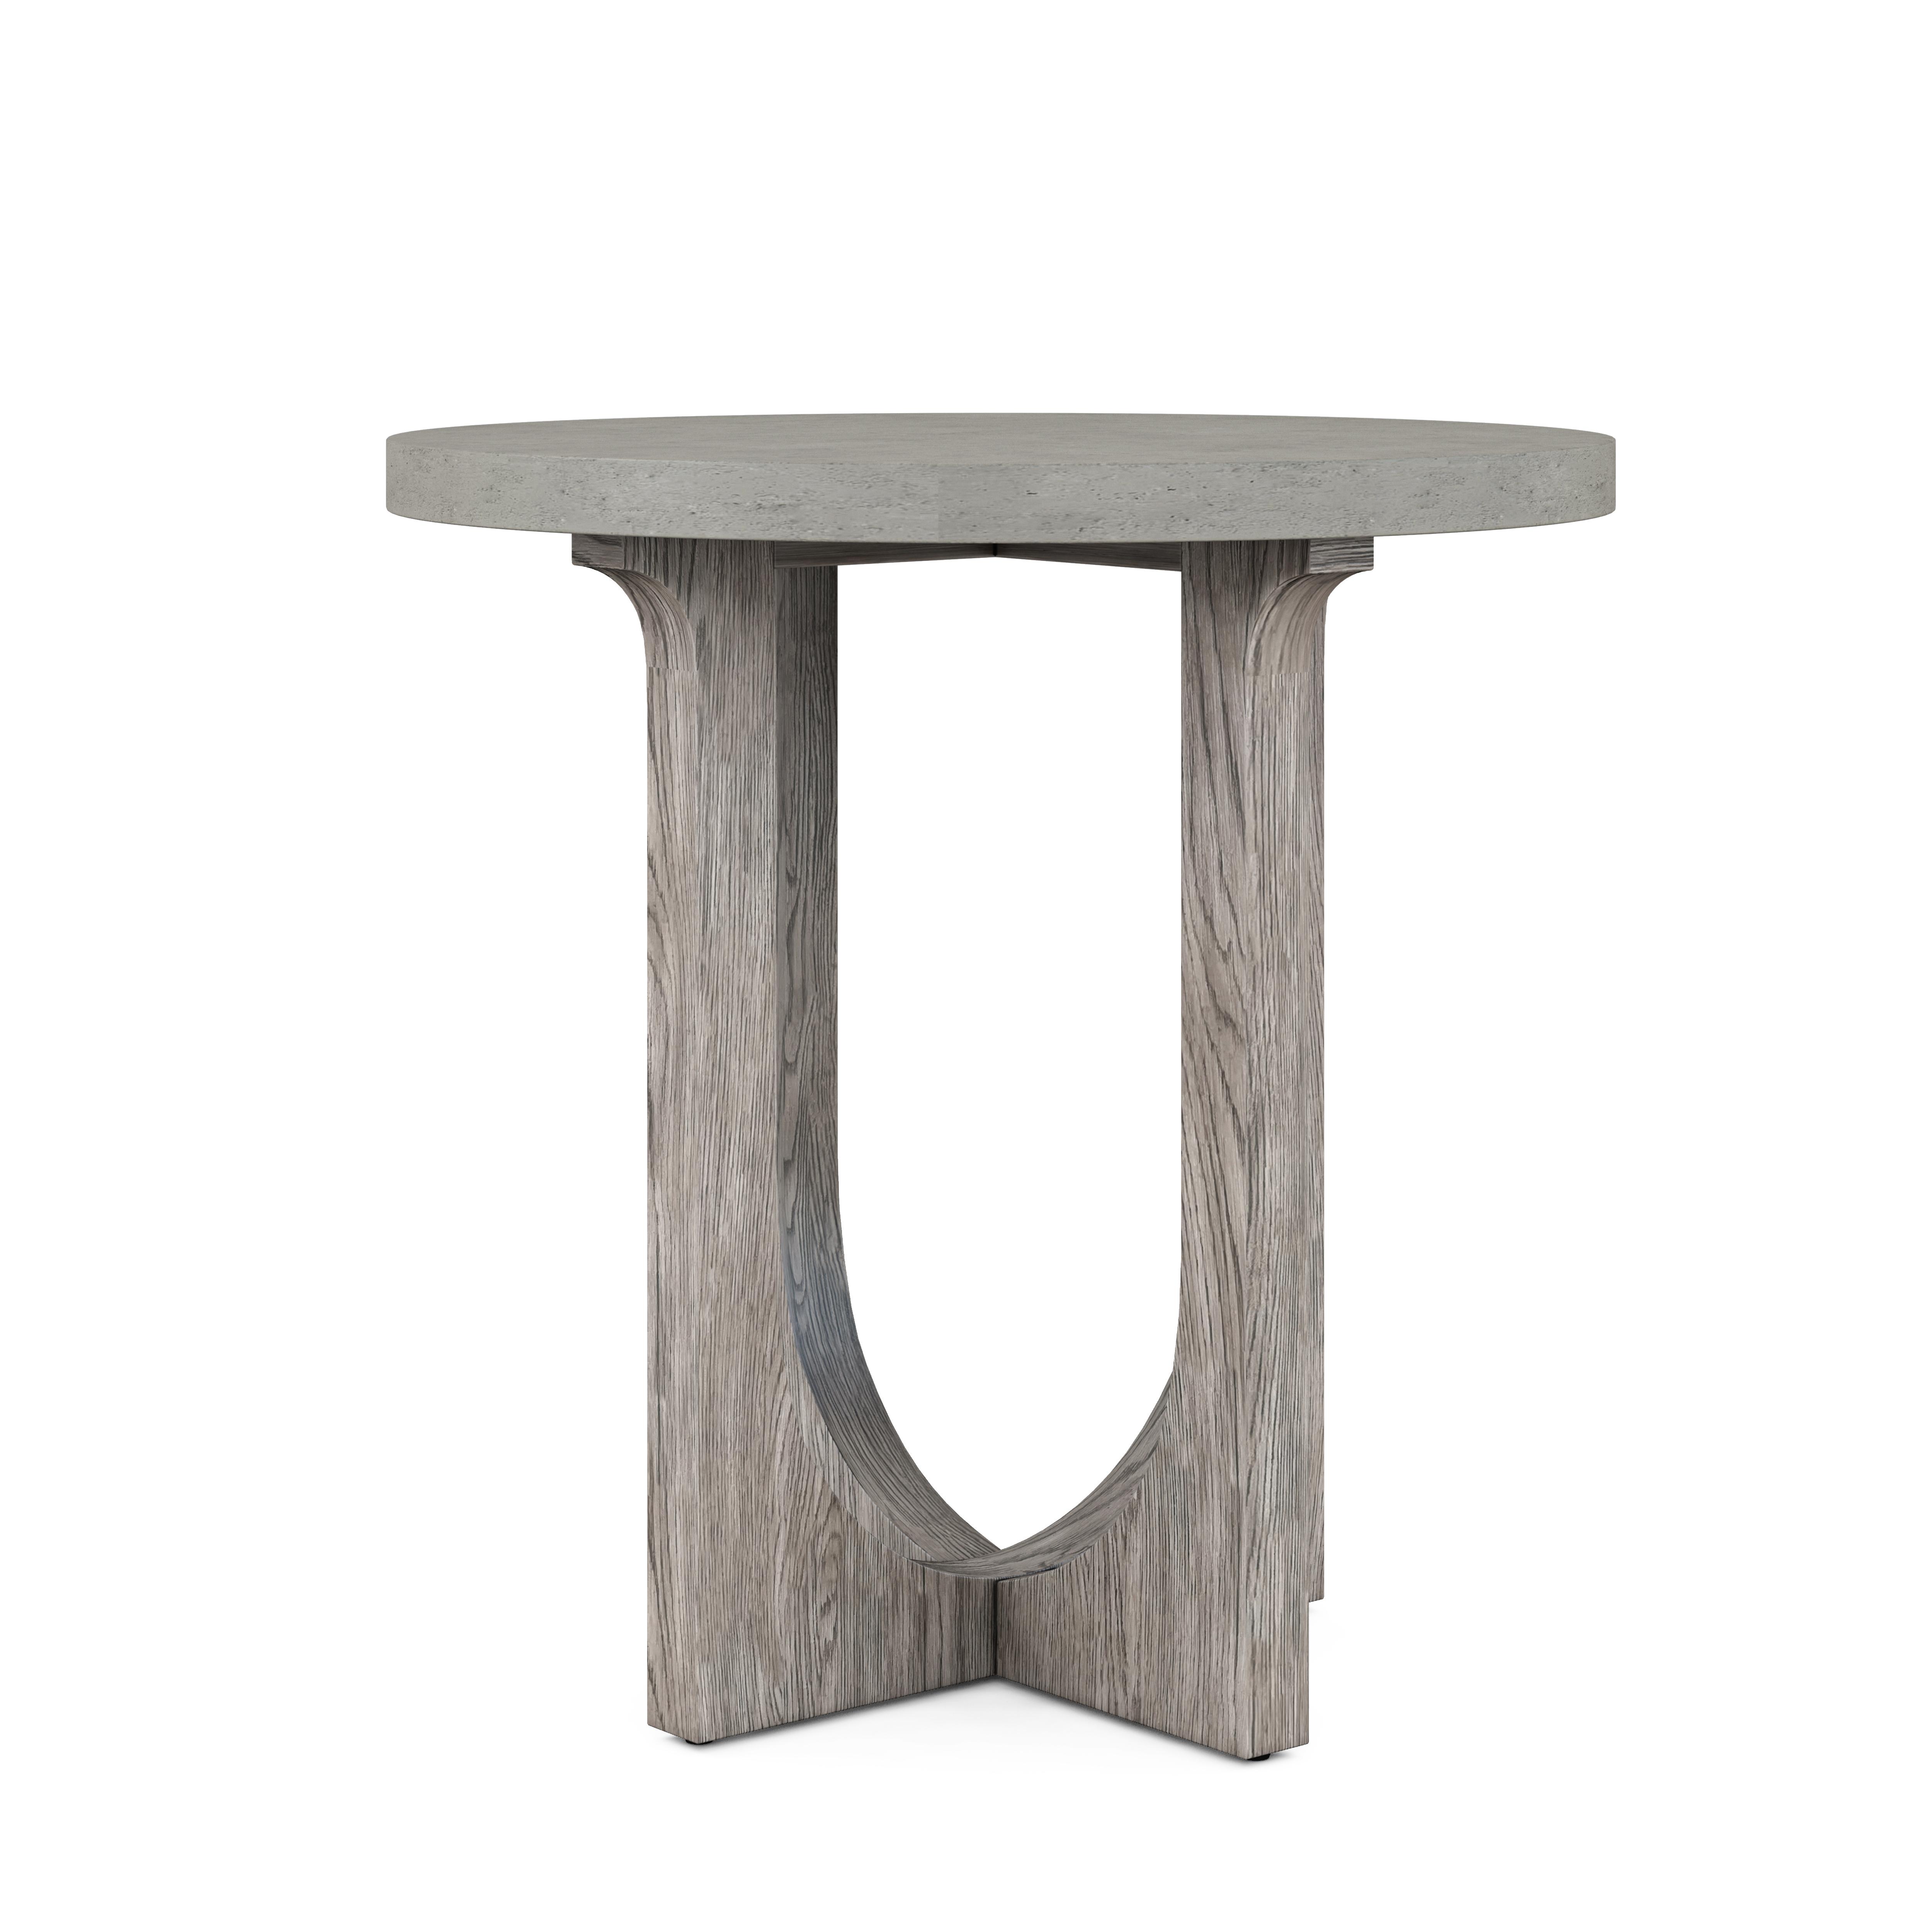 Modern, Casual Chairside Table Vault 285303-2354 in Gray 